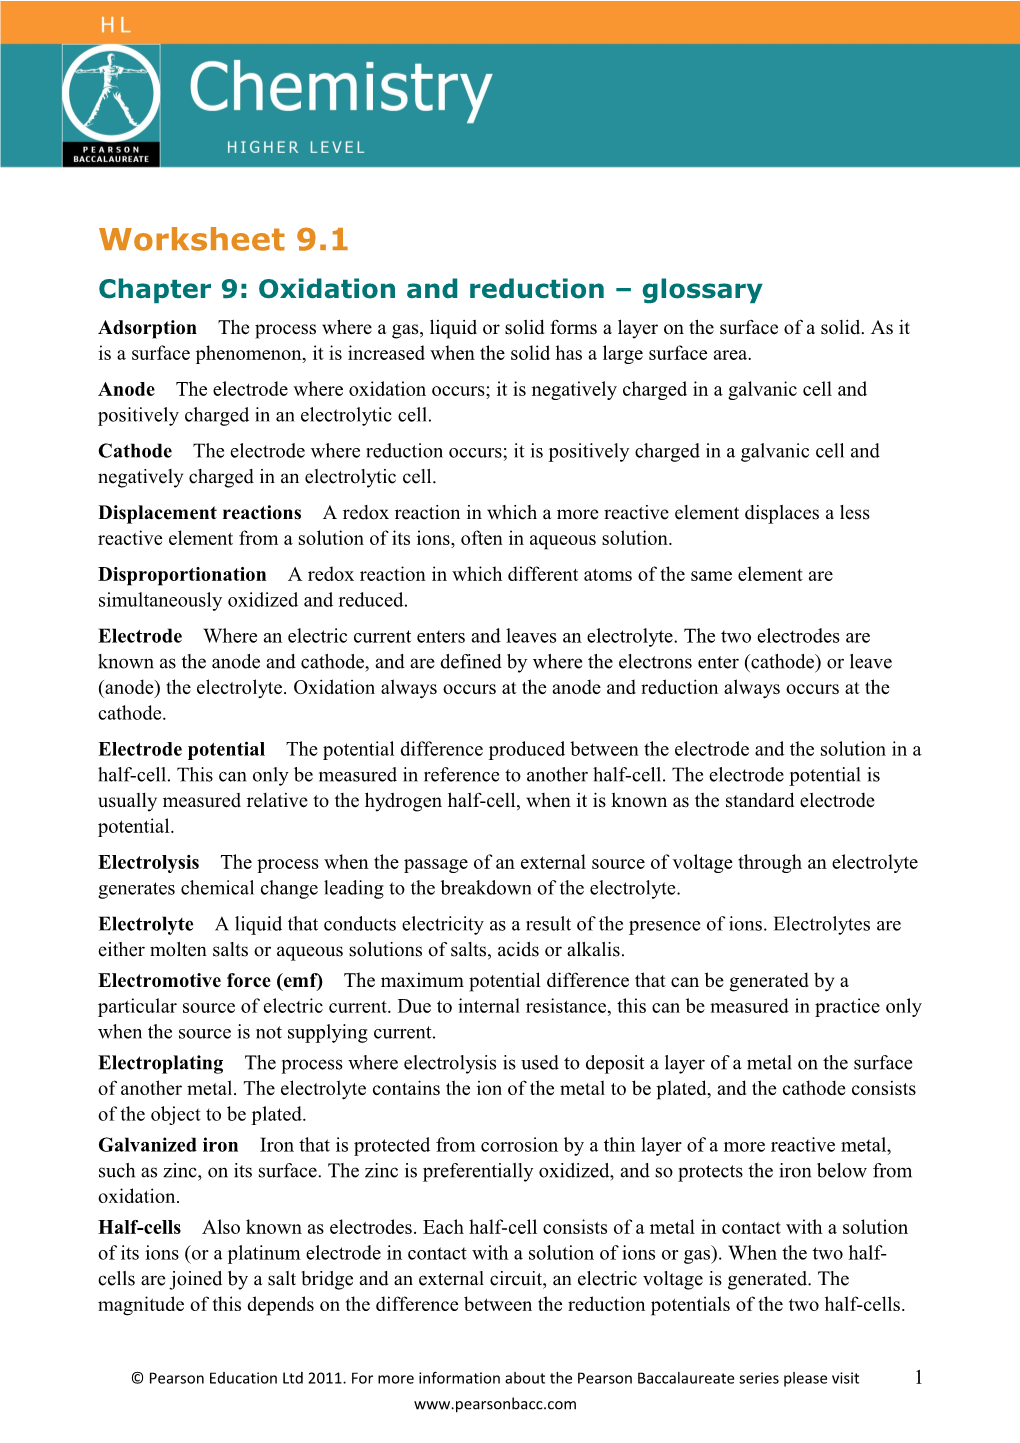 Chapter 9: Oxidation and Reduction Glossary